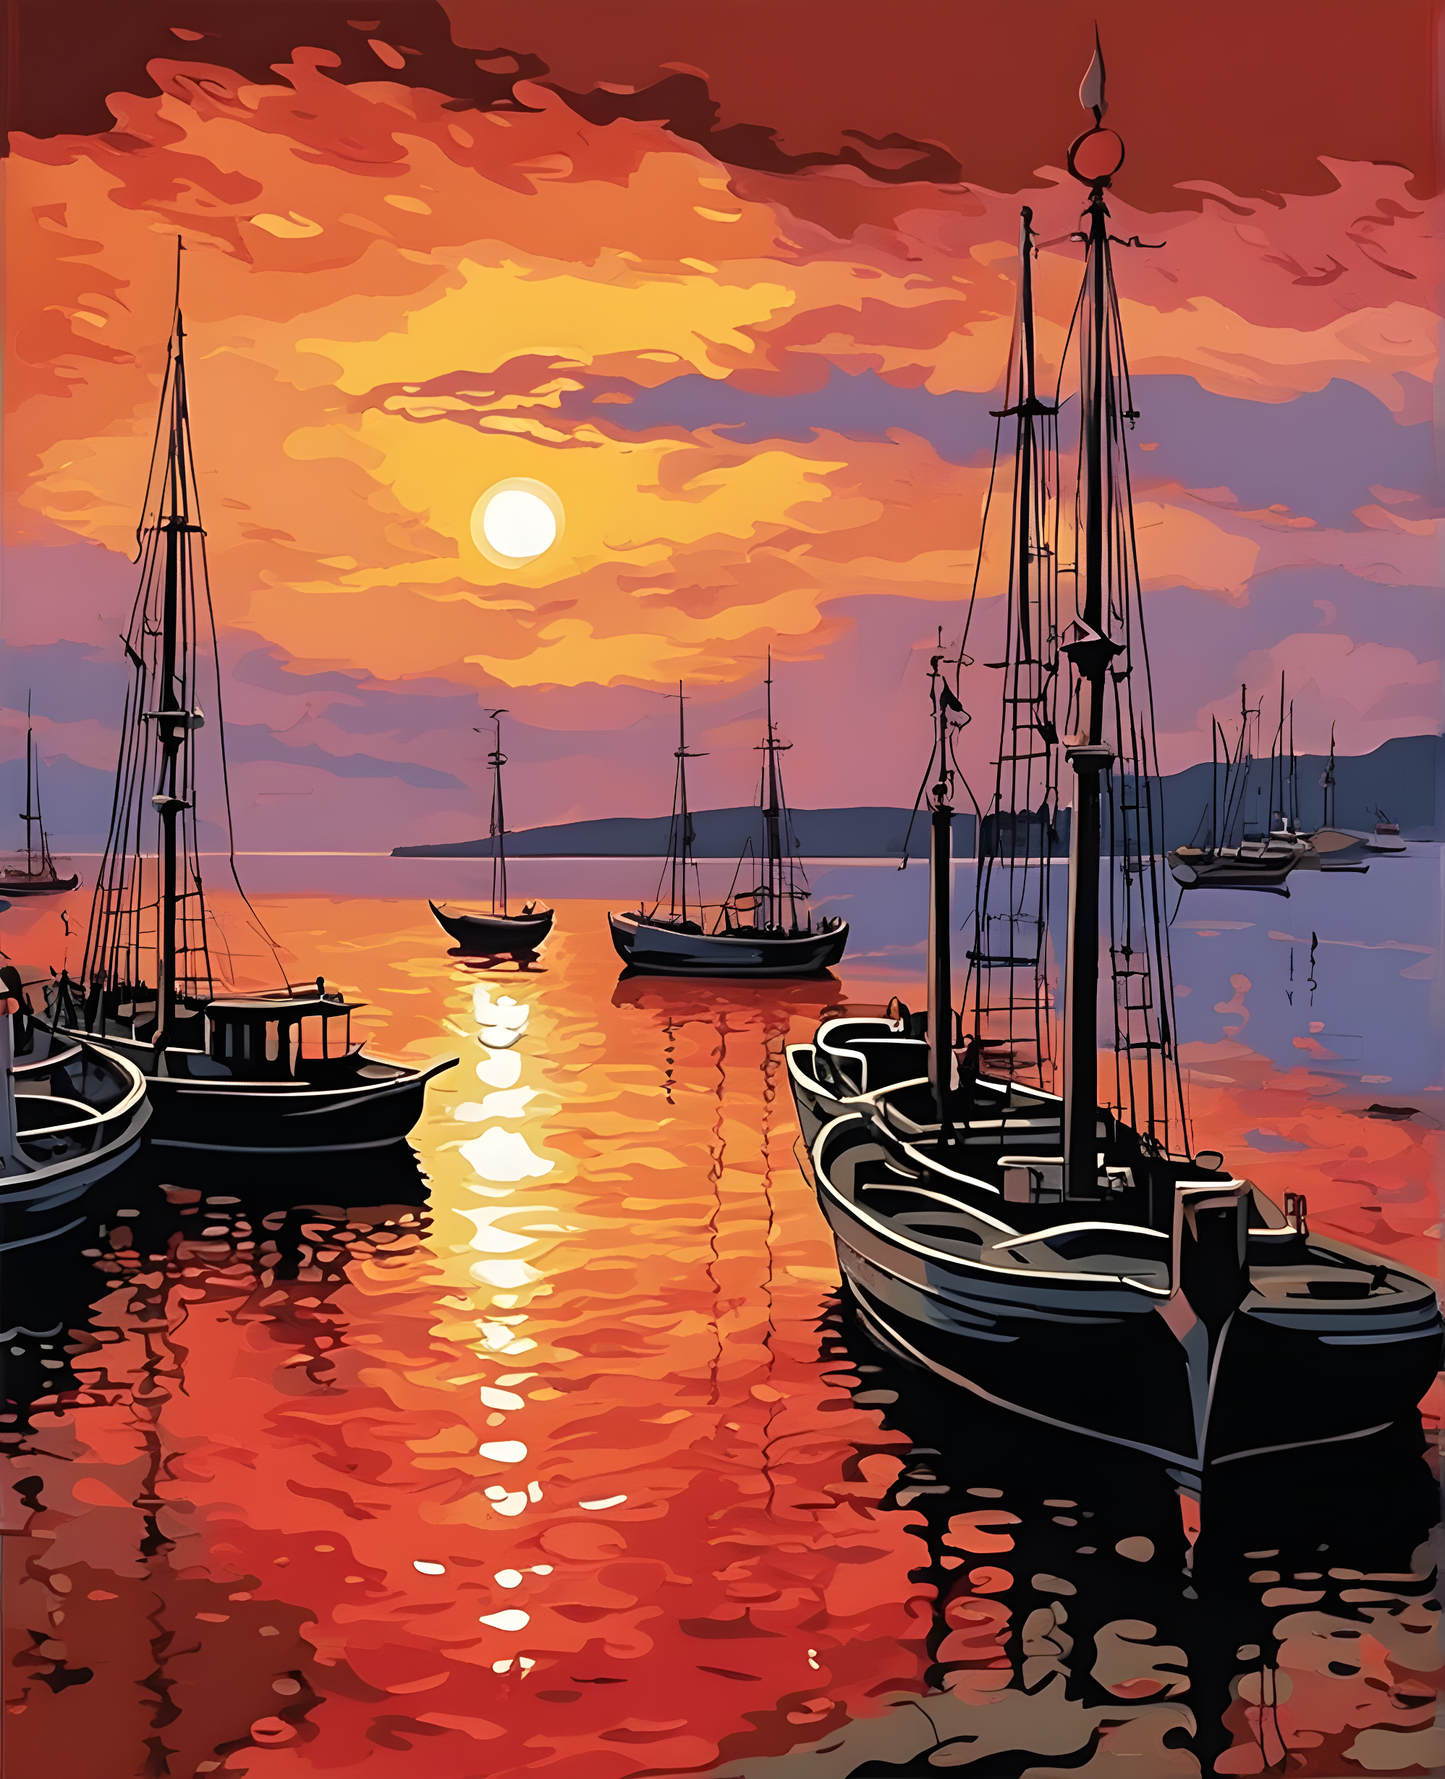 Reddish Sunset Over the Harbor (2) - Van-Go Paint-By-Number Kit